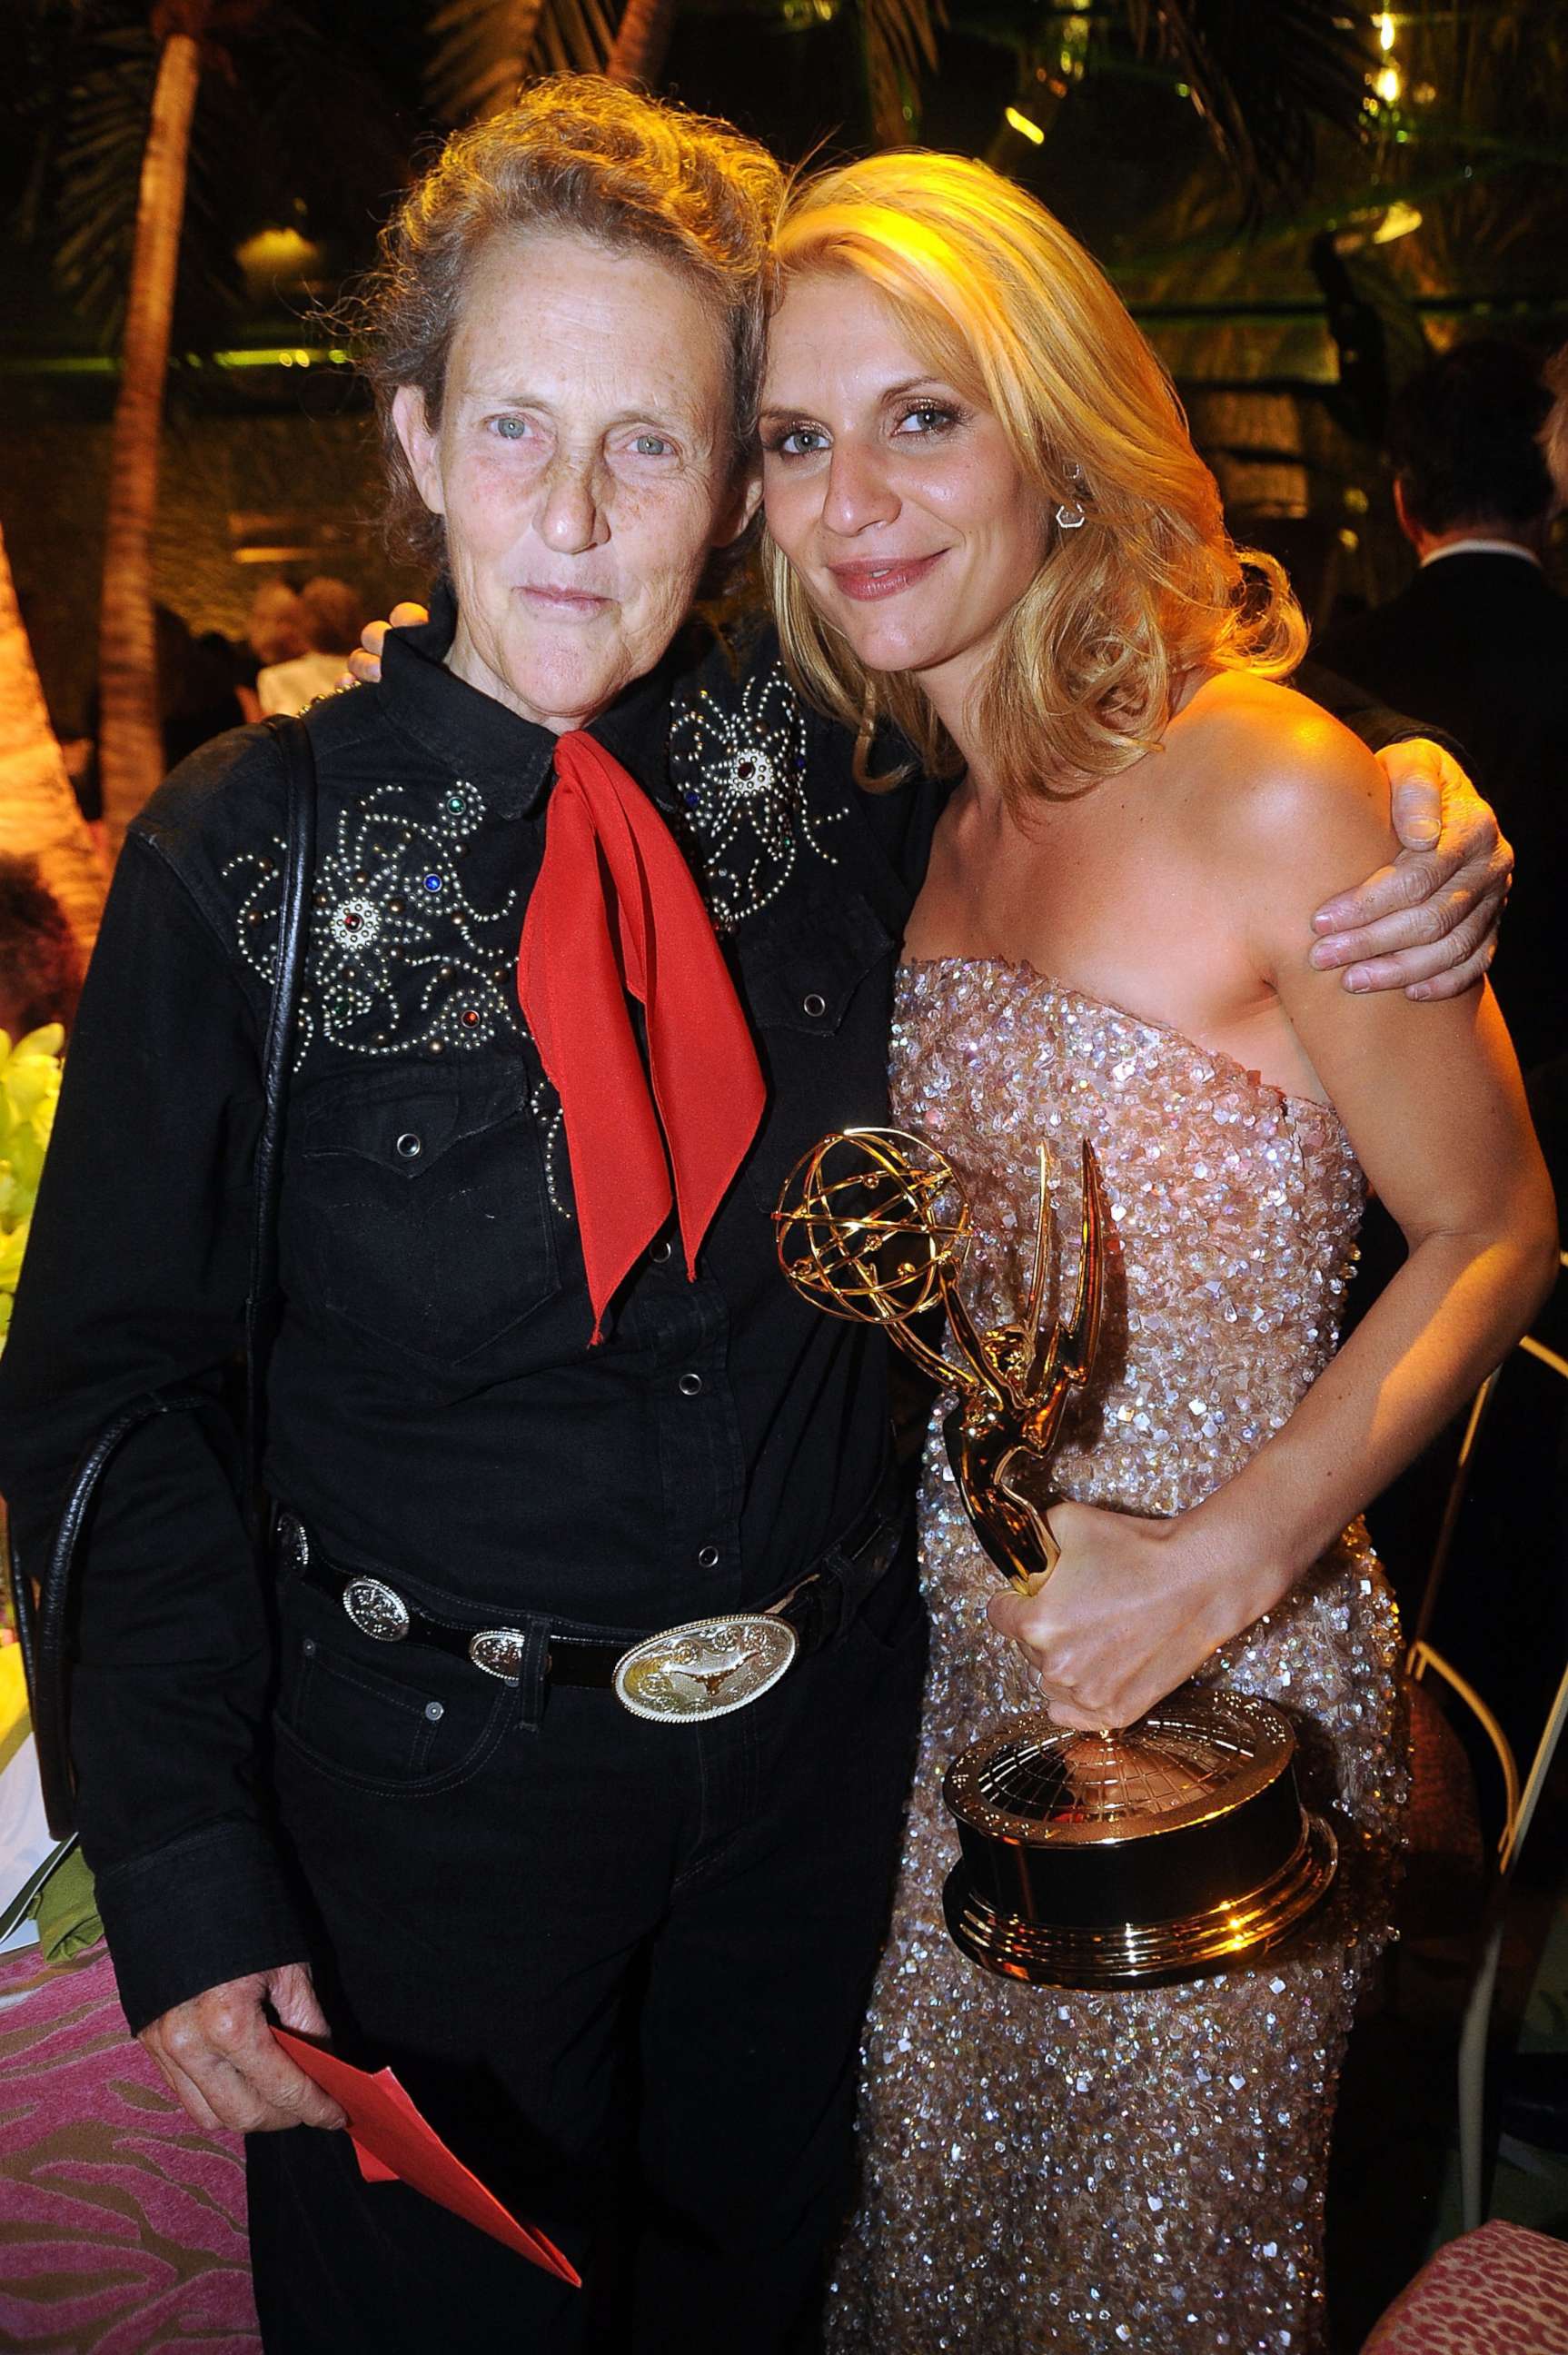 PHOTO: Temple Grandin and actress Claire Danes attend HBO's Annual Emmy Awards after party at the Pacific Design Center on Aug. 29, 2010 in West Hollywood, Calif.